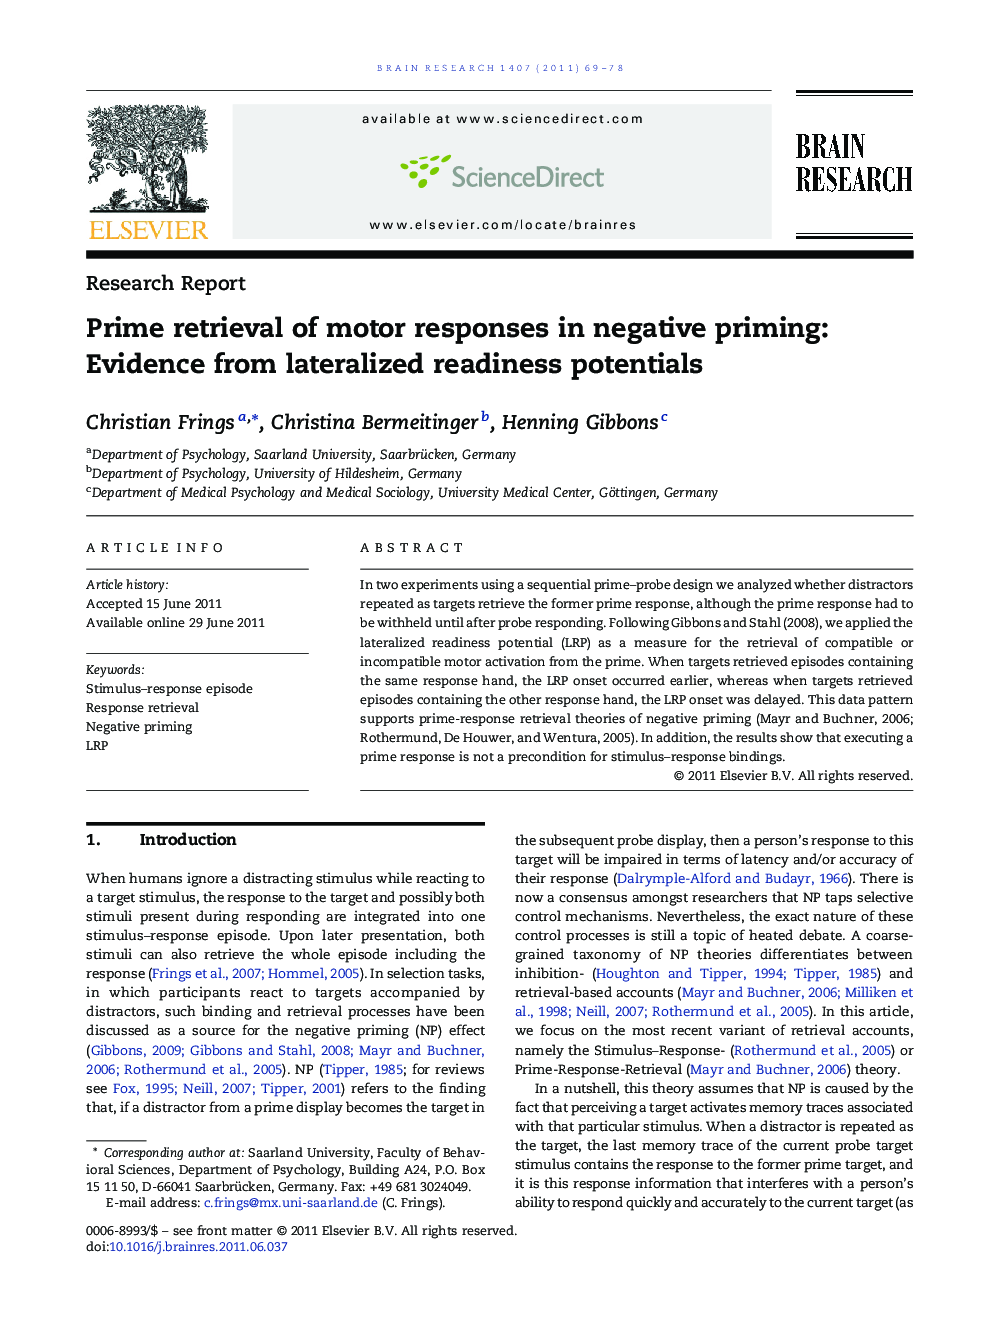 Prime retrieval of motor responses in negative priming: Evidence from lateralized readiness potentials